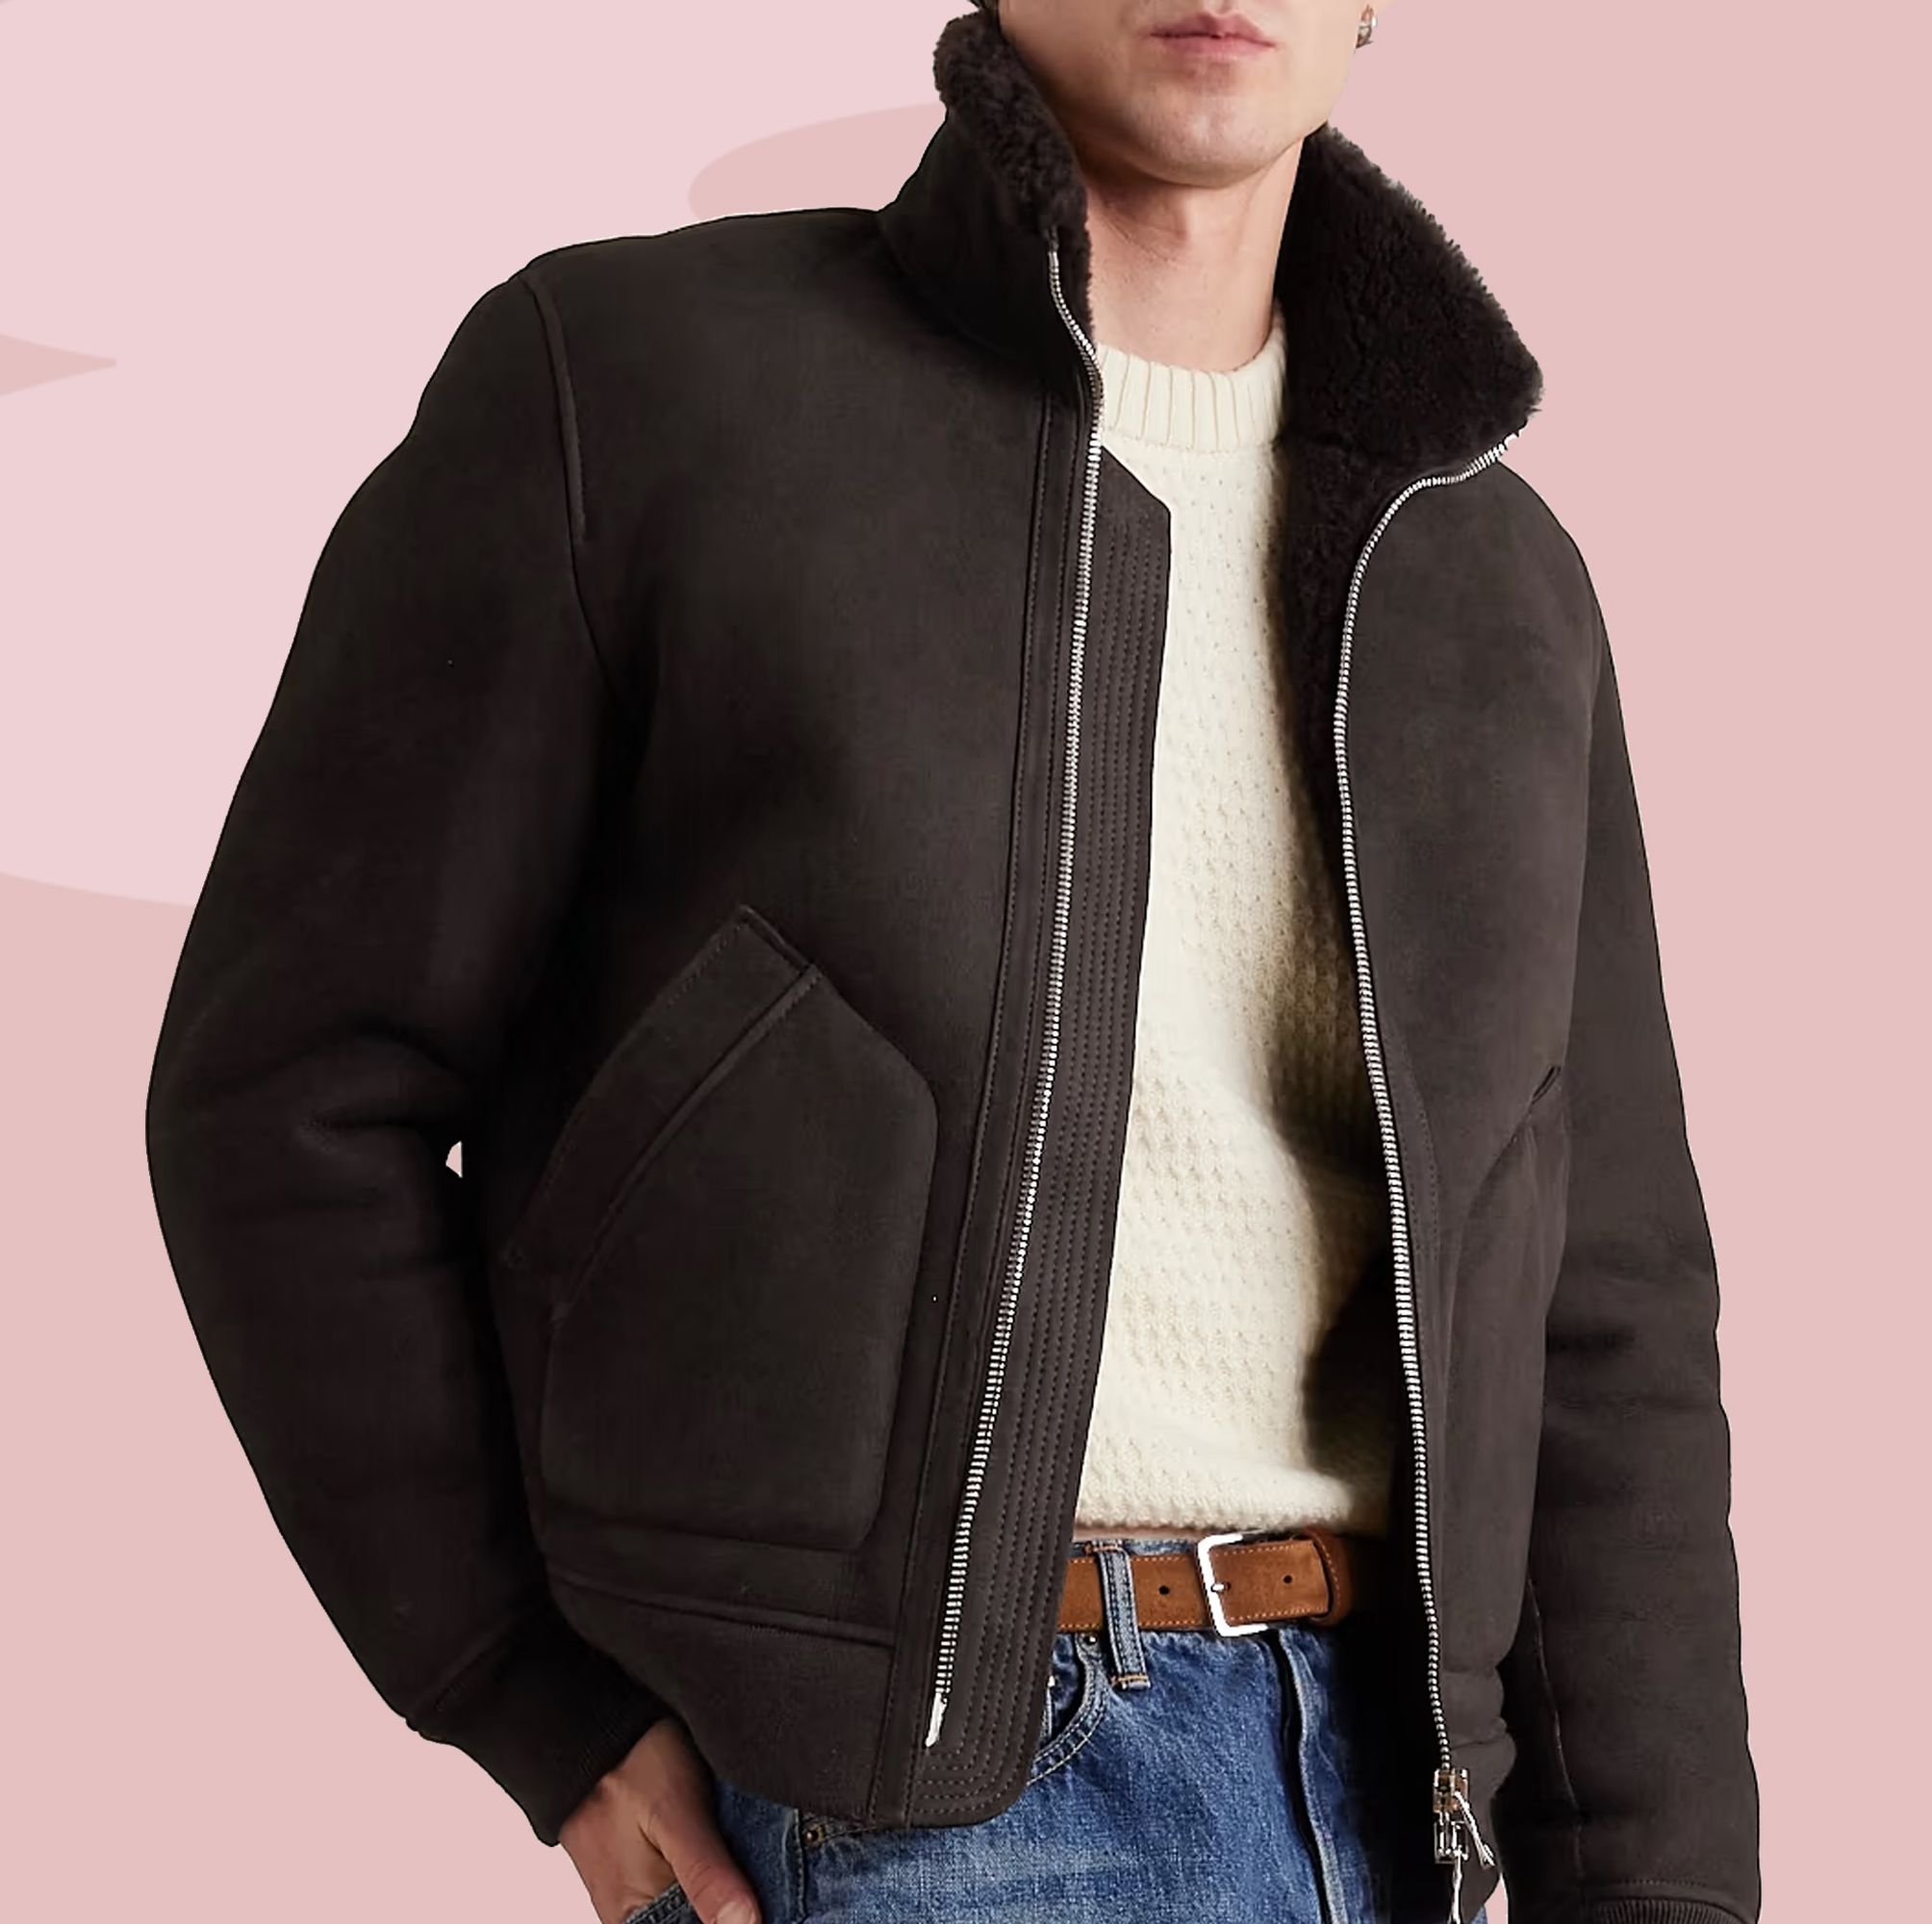 The Shearling Jacket Isn't Just an Outerwear Style—It's a Lifestyle